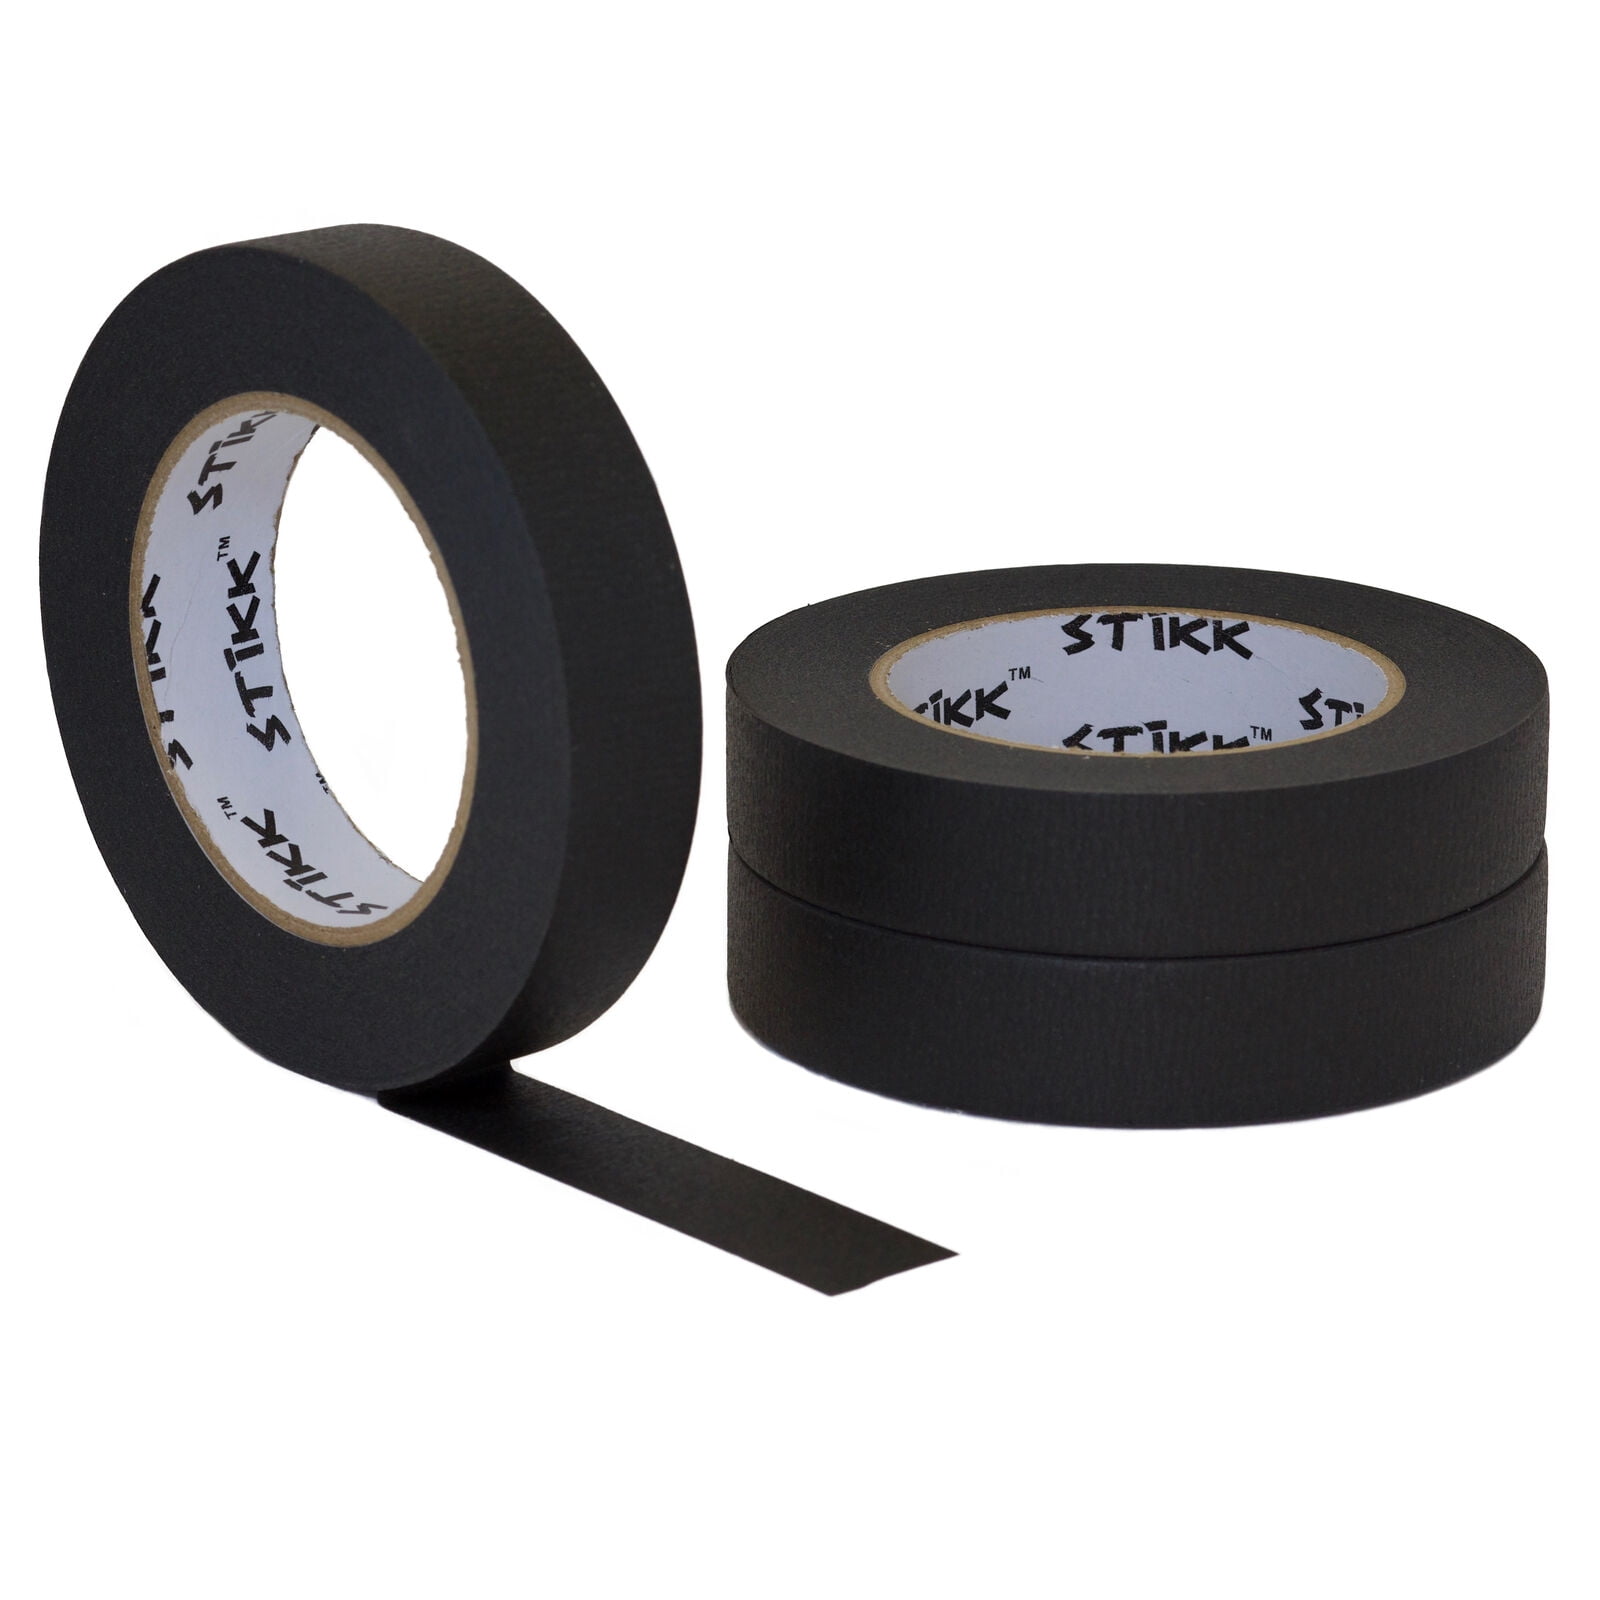 Professional Painters Tape 20mm X 50m (3-pack) Painters Masking Tape Bulk  Residue-free And Artisan Grade Wall Trim Tape